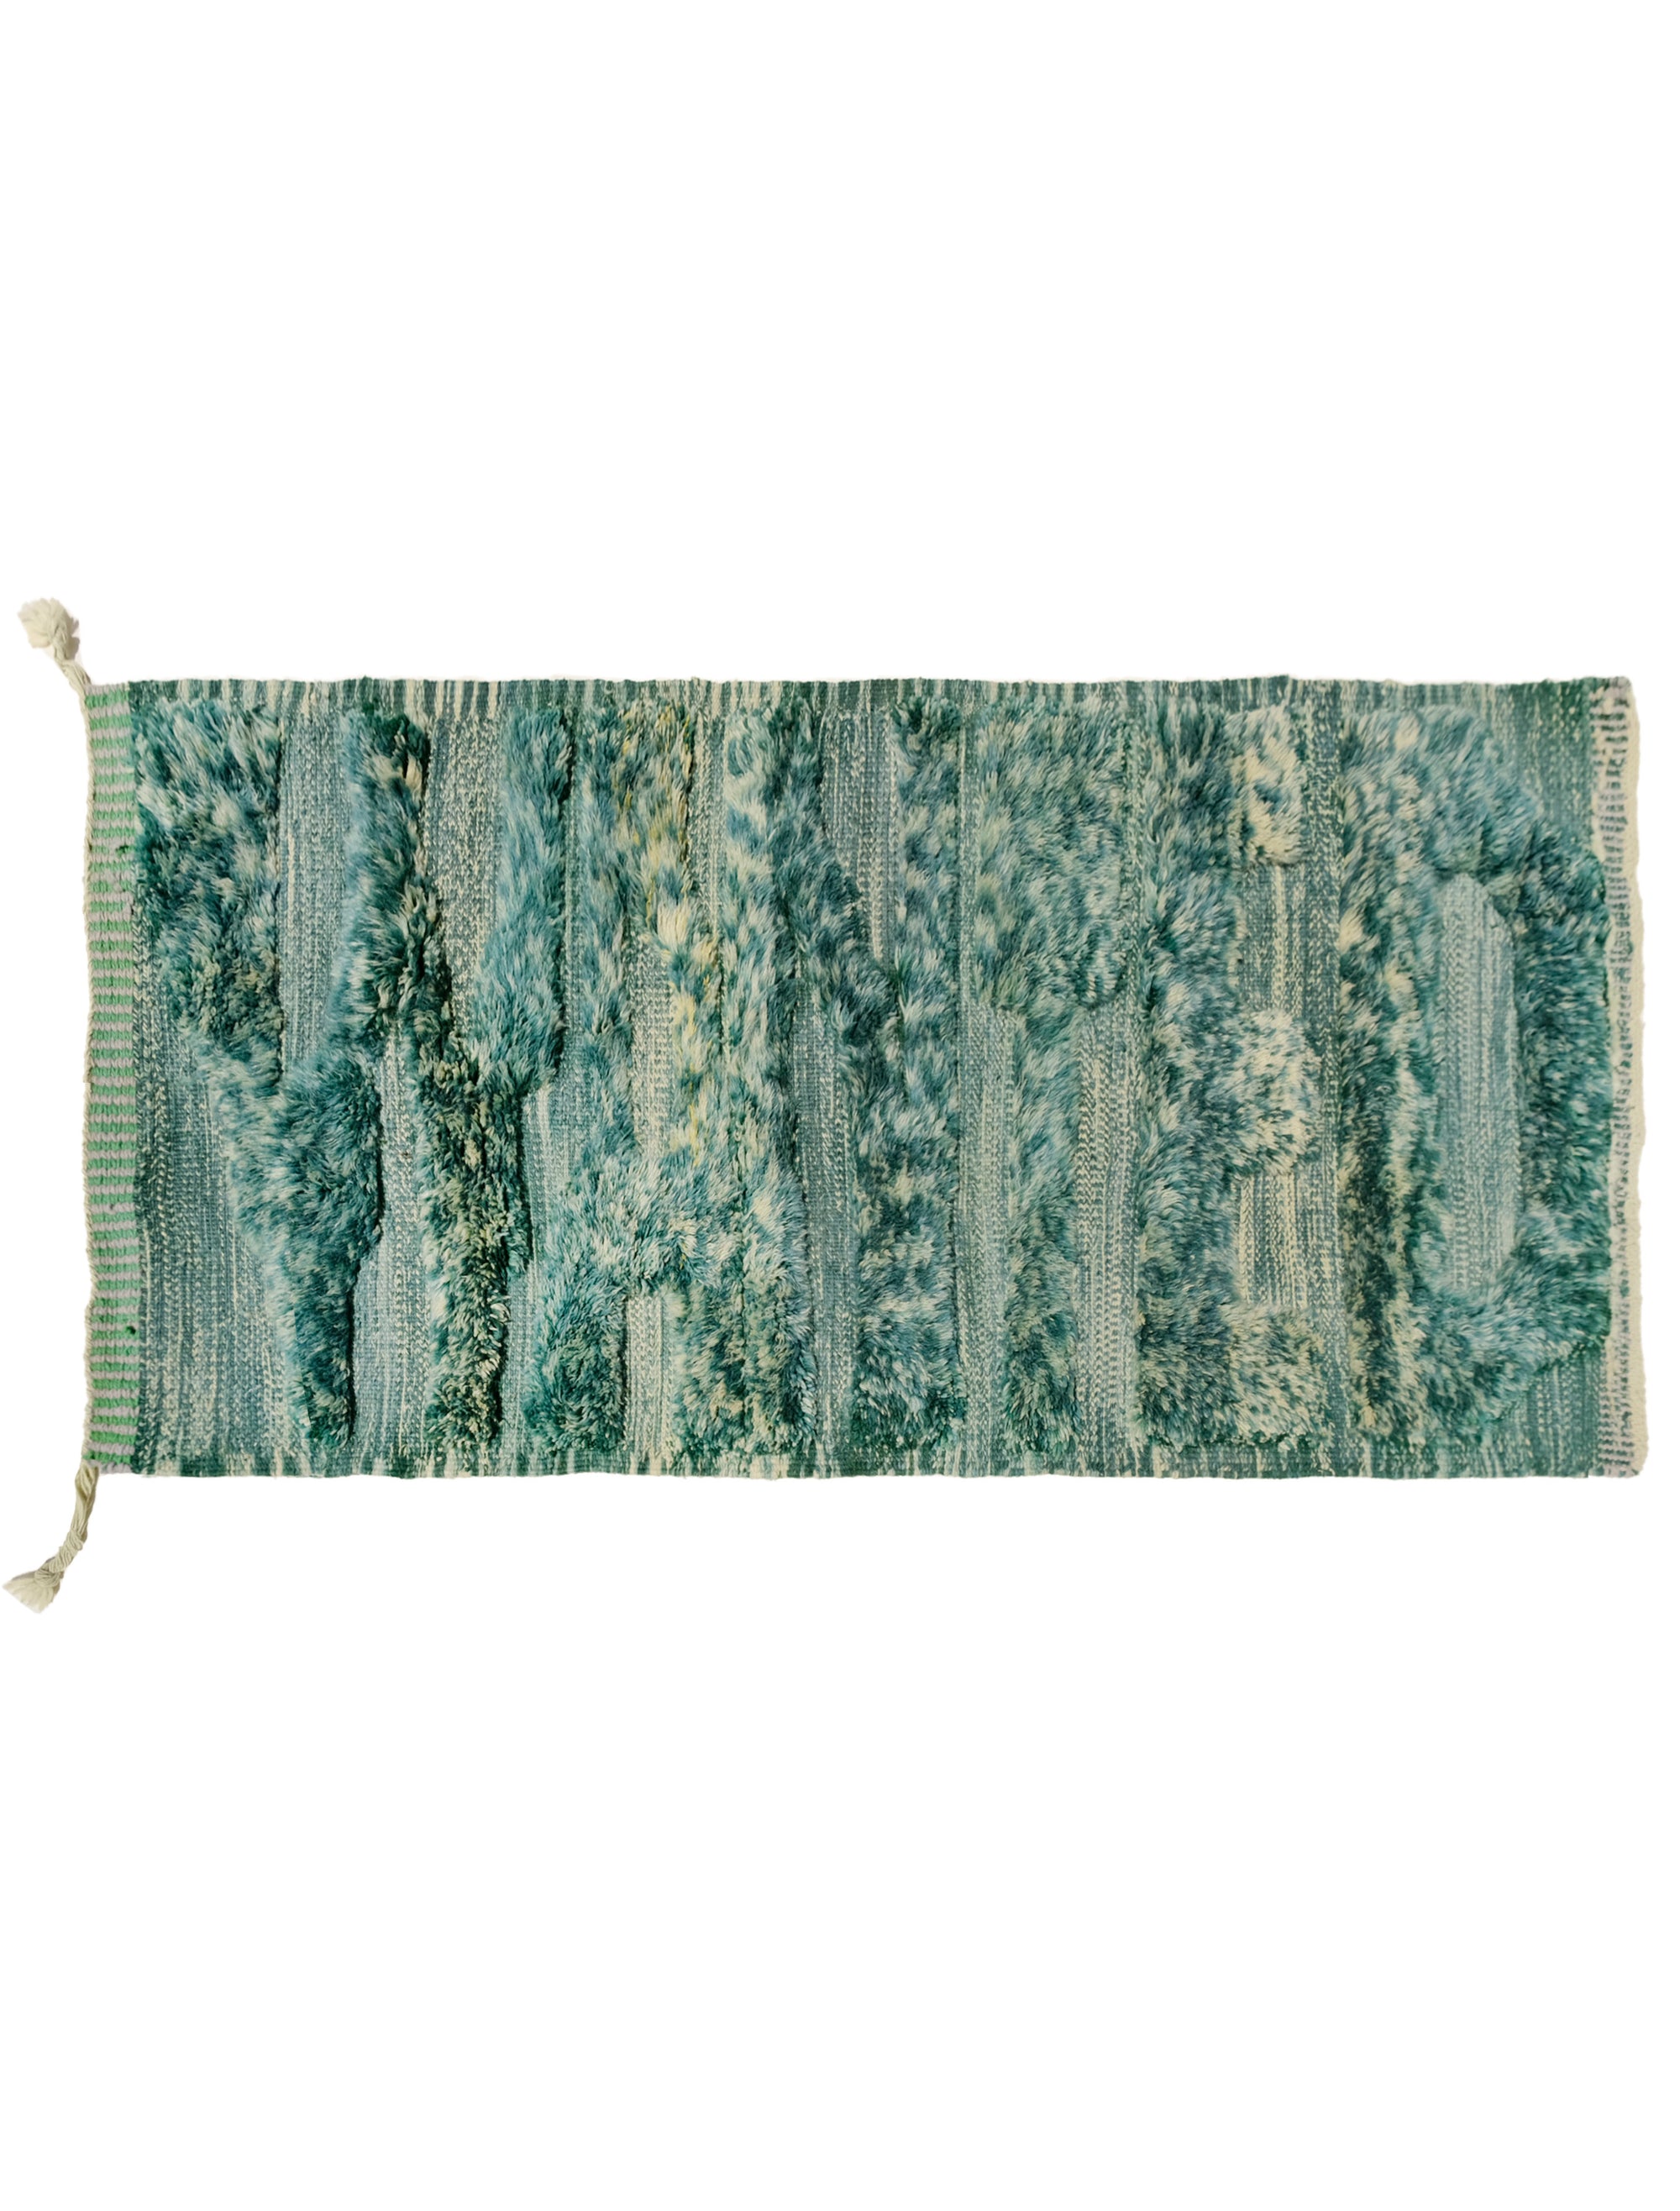  "Verdant Whispers Wanted Rug" from Purple Mountain Rugs, where lush greens meet an intriguing message. This rug is meticulously crafted using a unique combination of different shade yarns to create a captivating visual effect. The word "WANTED" is artistically woven into the rug with a fuzzy texture, gradually fading into the verdant hues of green.